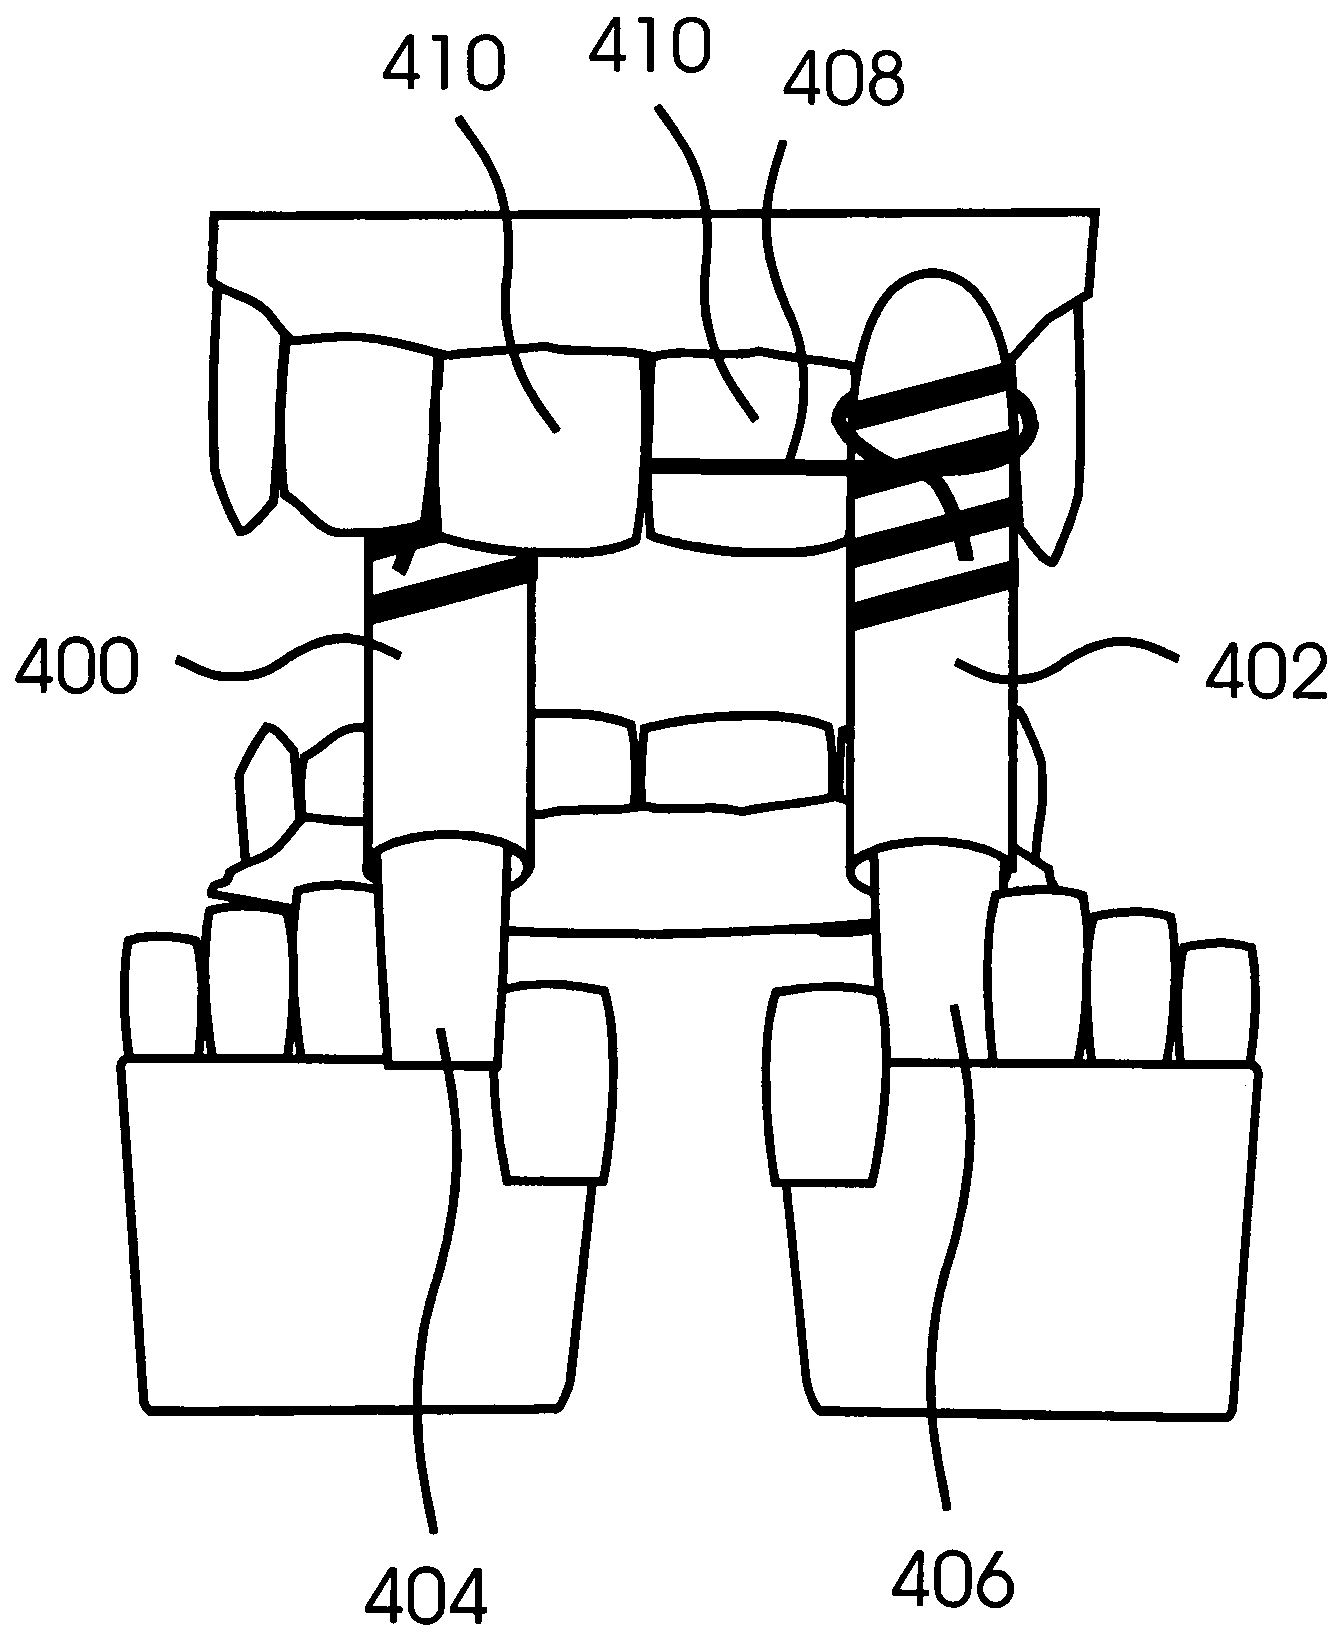 Apparatus and method for holding and manipulating dental floss